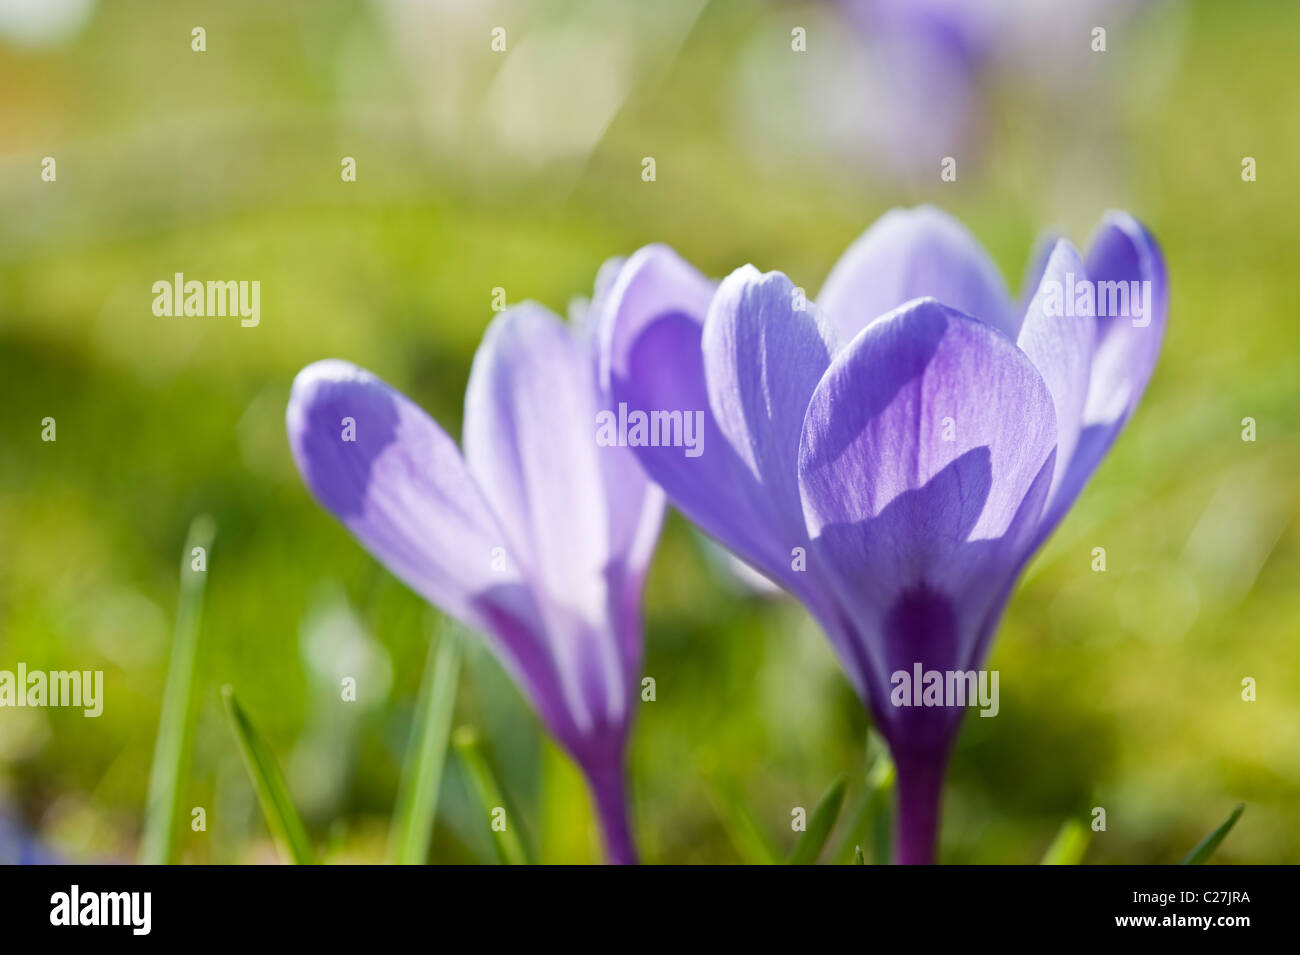 Fresh Spring crocus flower with shallow depth of field Stock Photo